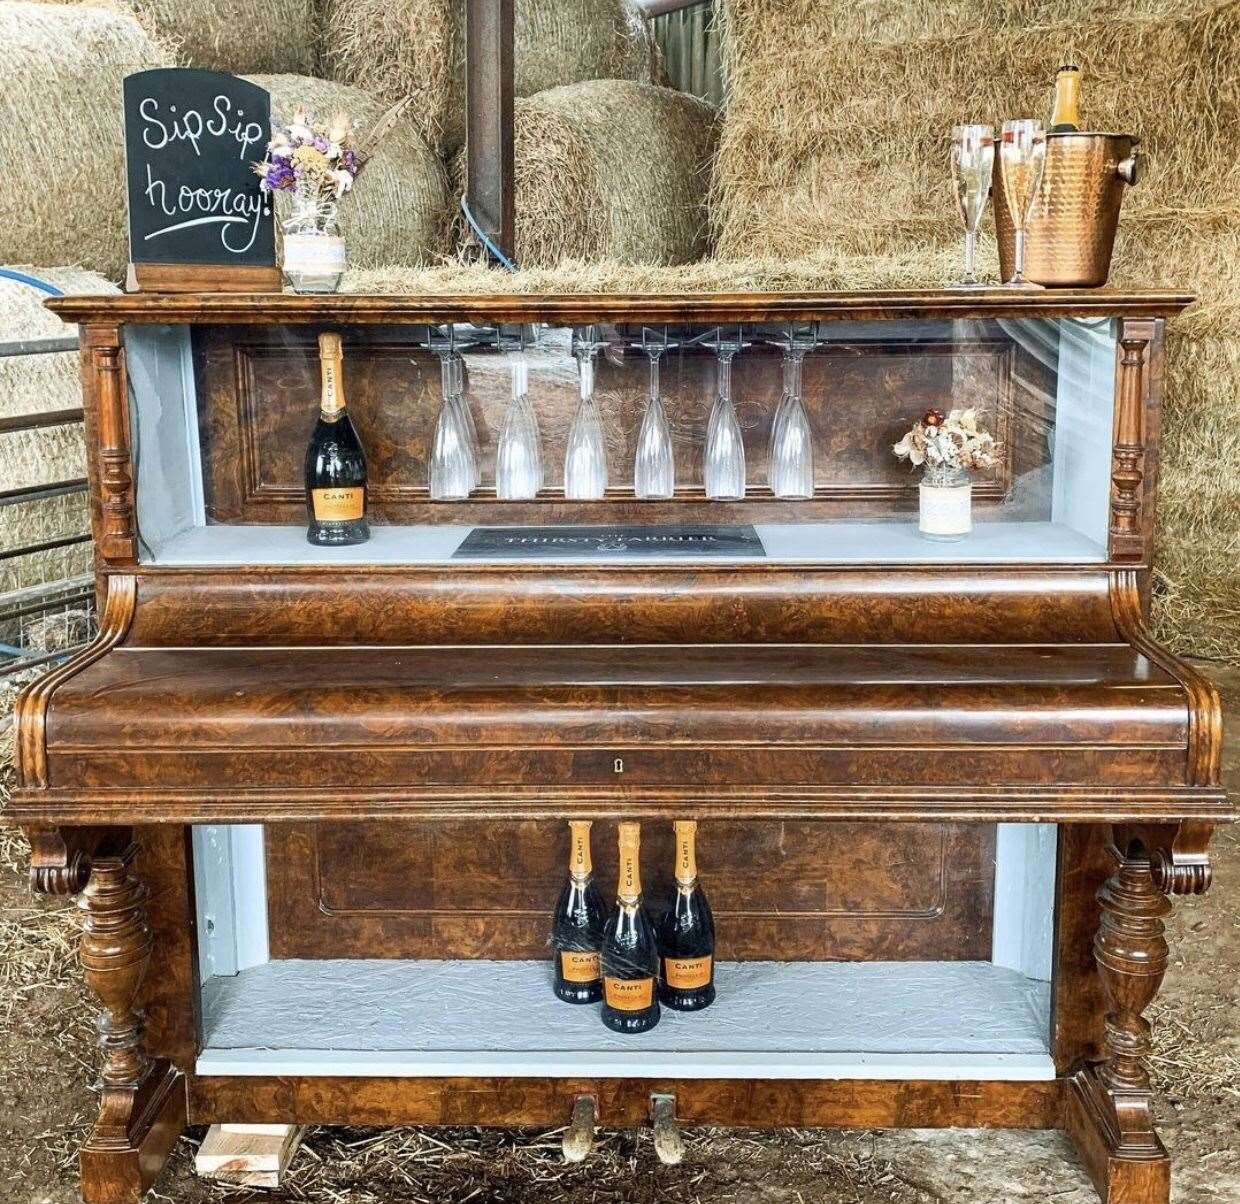 The Thirsty Farrier piano bar, made by Jon